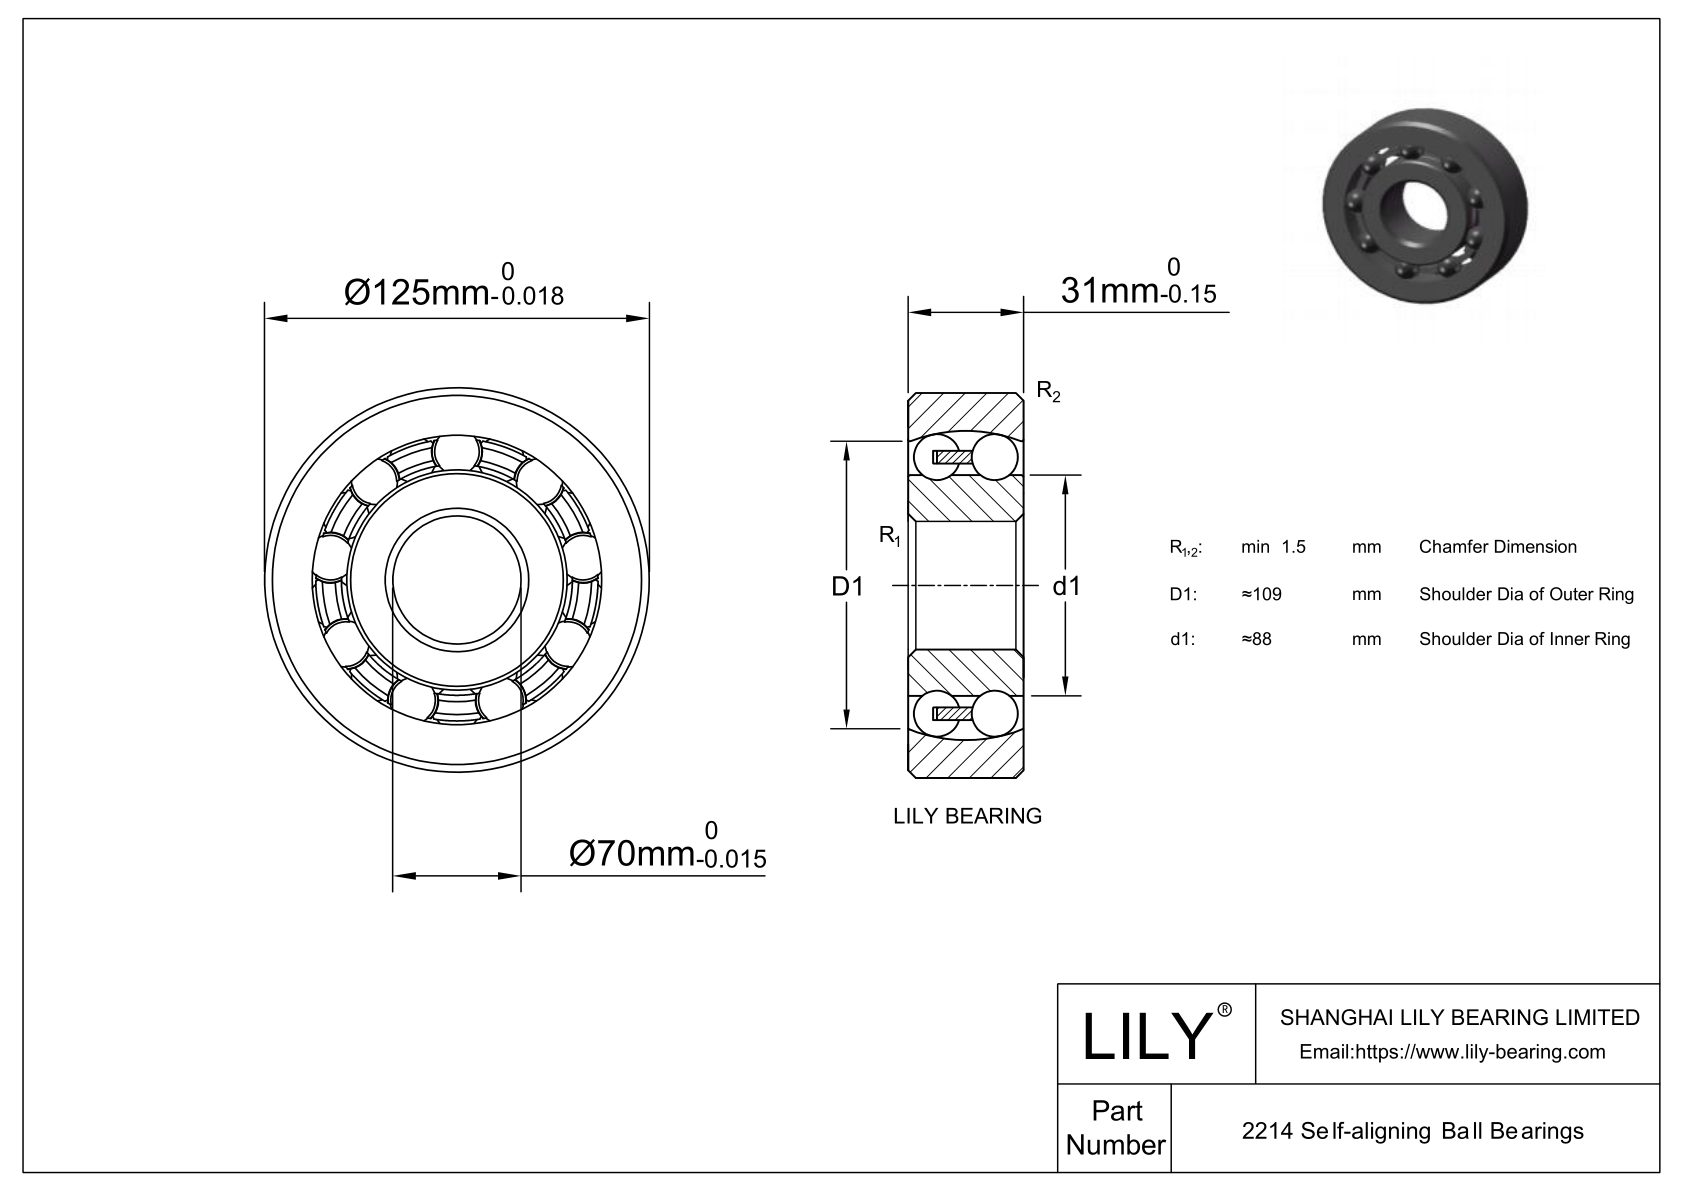 S2214 Stainless Steel Self Aligning Ball Bearings cad drawing